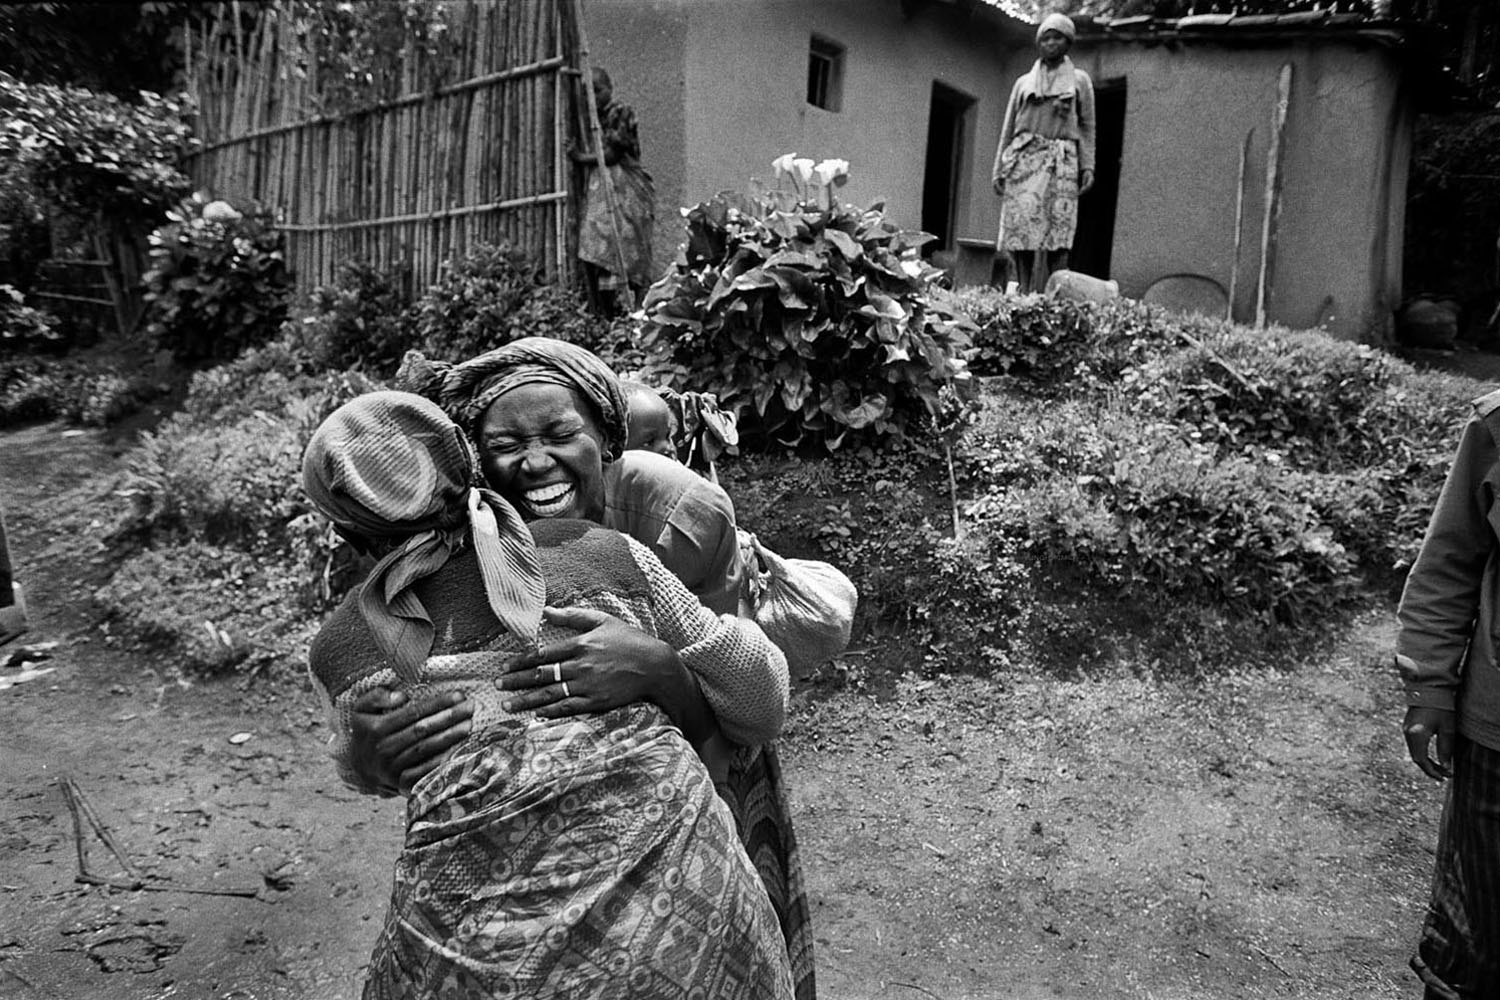 Photo by Yunghi Kim/ Contact Press Images.  Rwandan refugee crisis in 1996, refugee who had been living in Goma Zaire for two years afraid go home due to ethic genocide, were on the move again when fighting reached refugee camp. it forced 800,000 people to go back home to Rwanda.